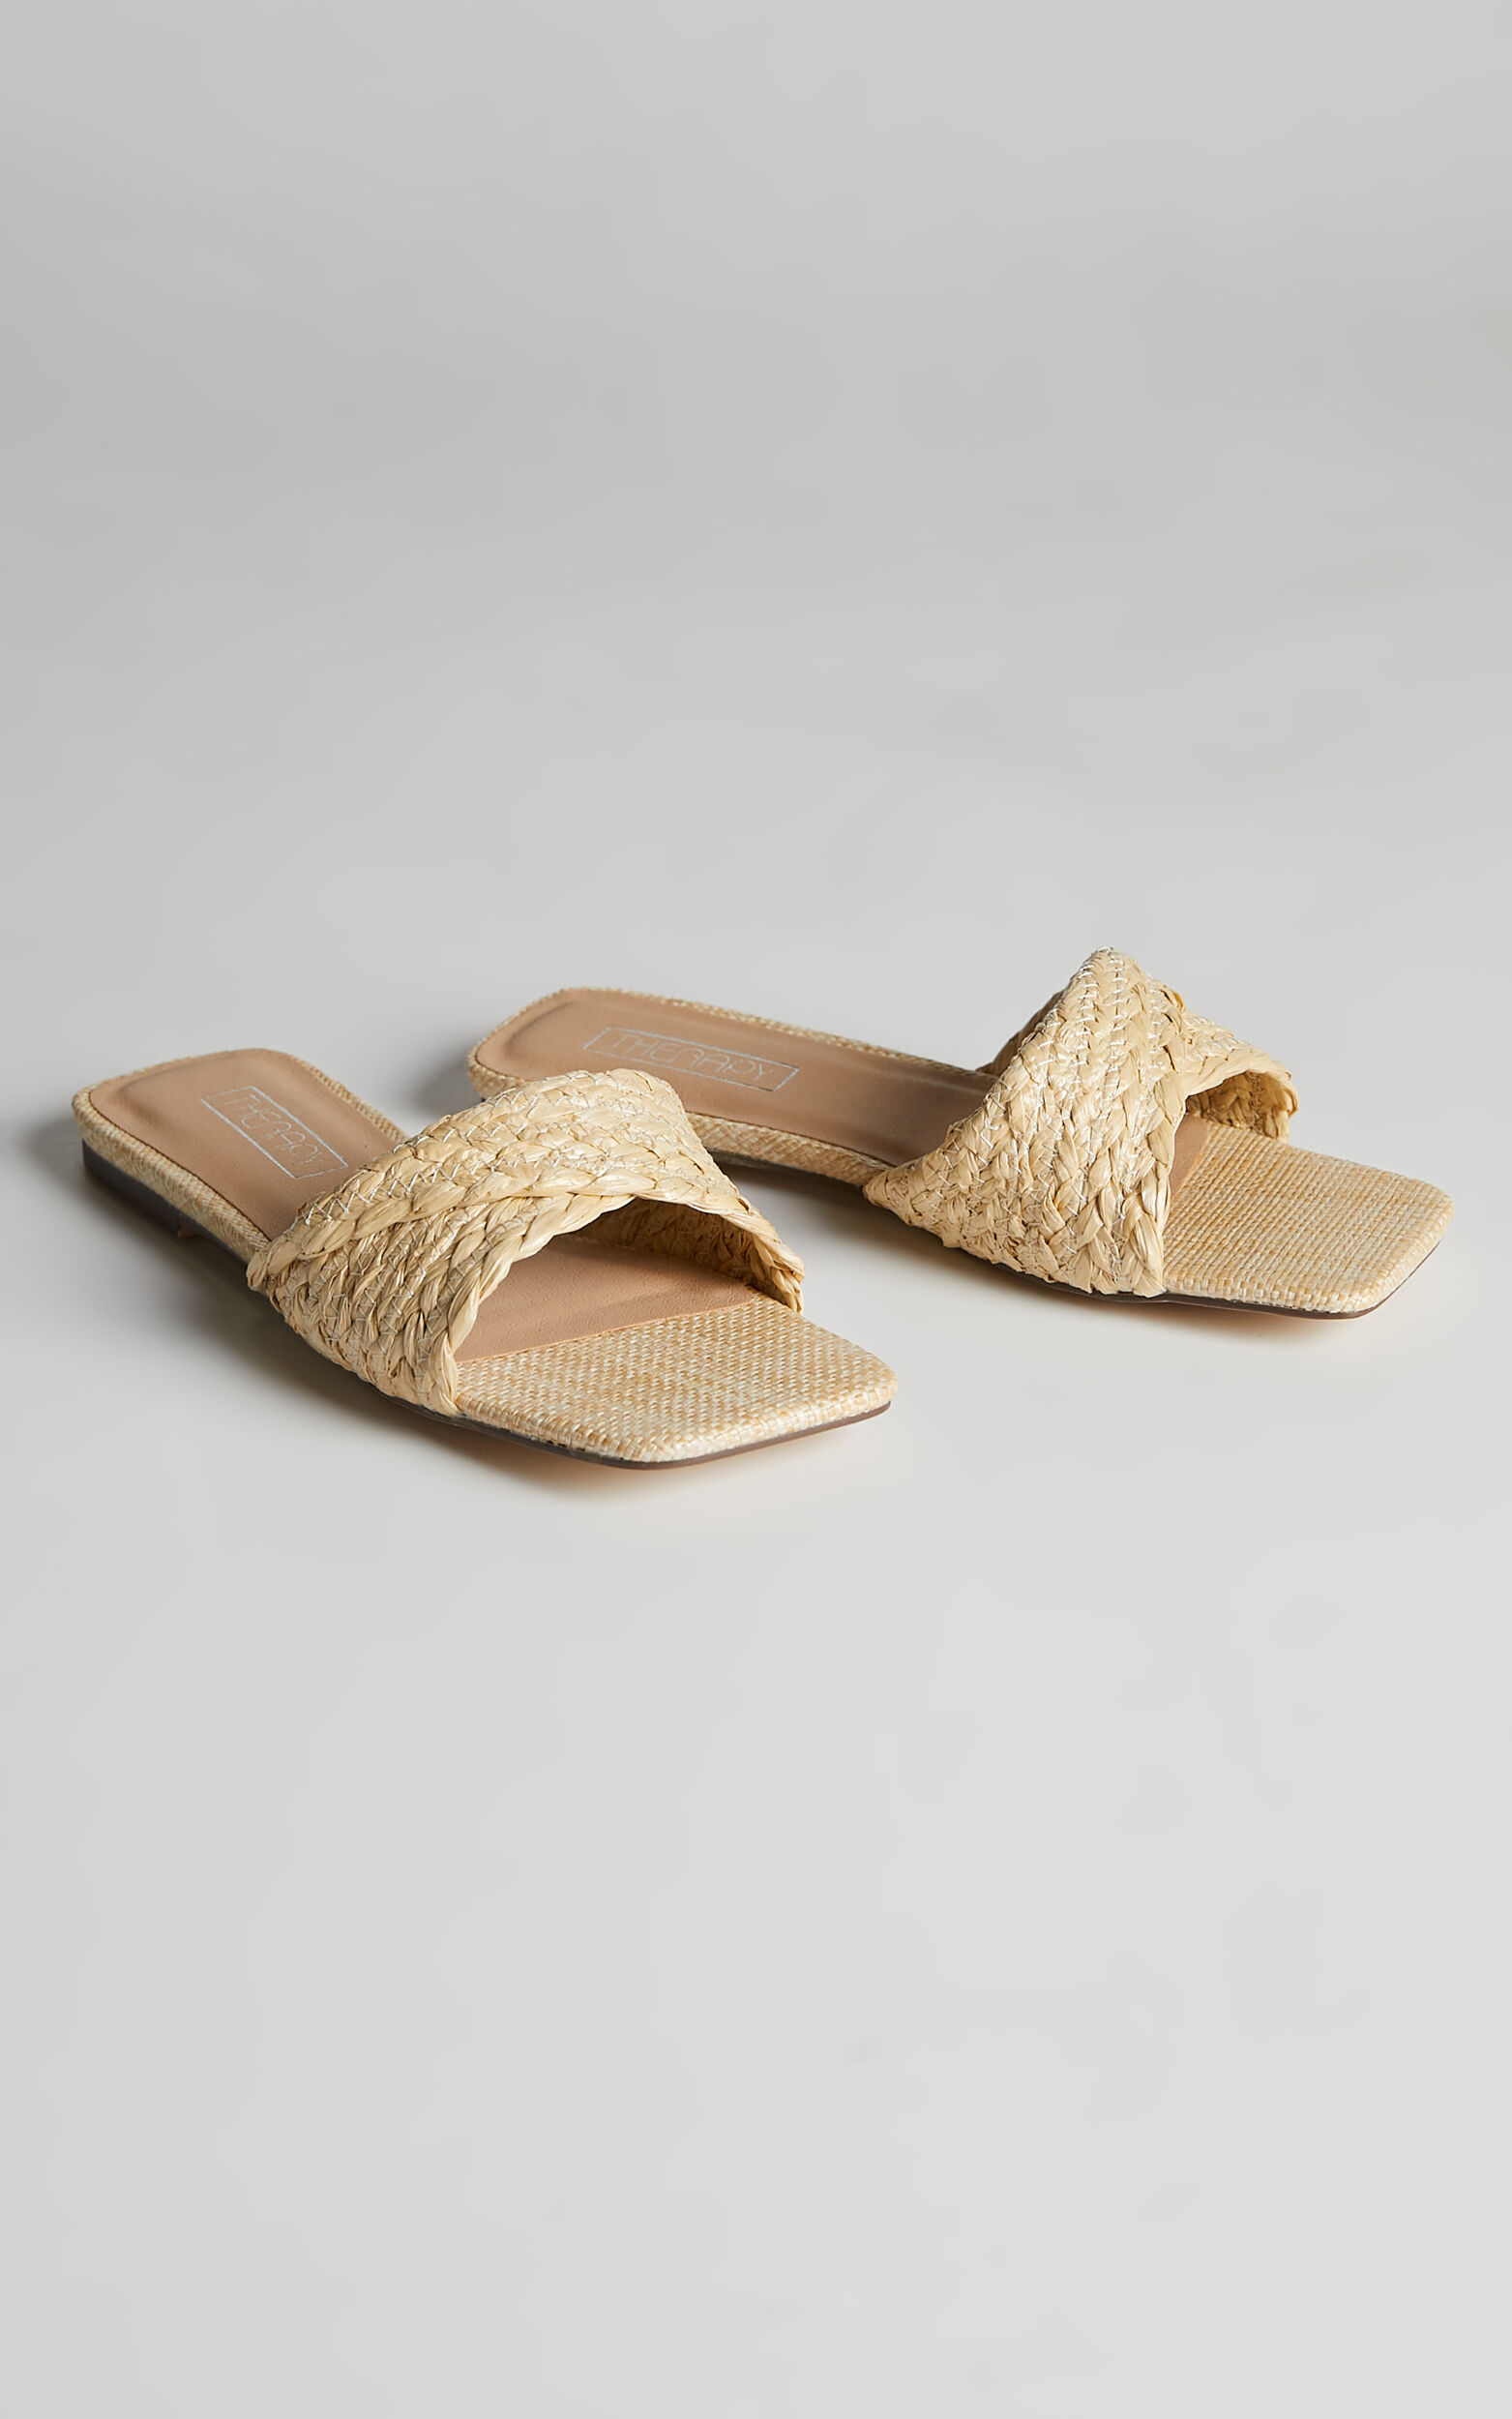 THERAPY - SHAY SANDALS in Natural Raffia - 05, NEU1, super-hi-res image number null